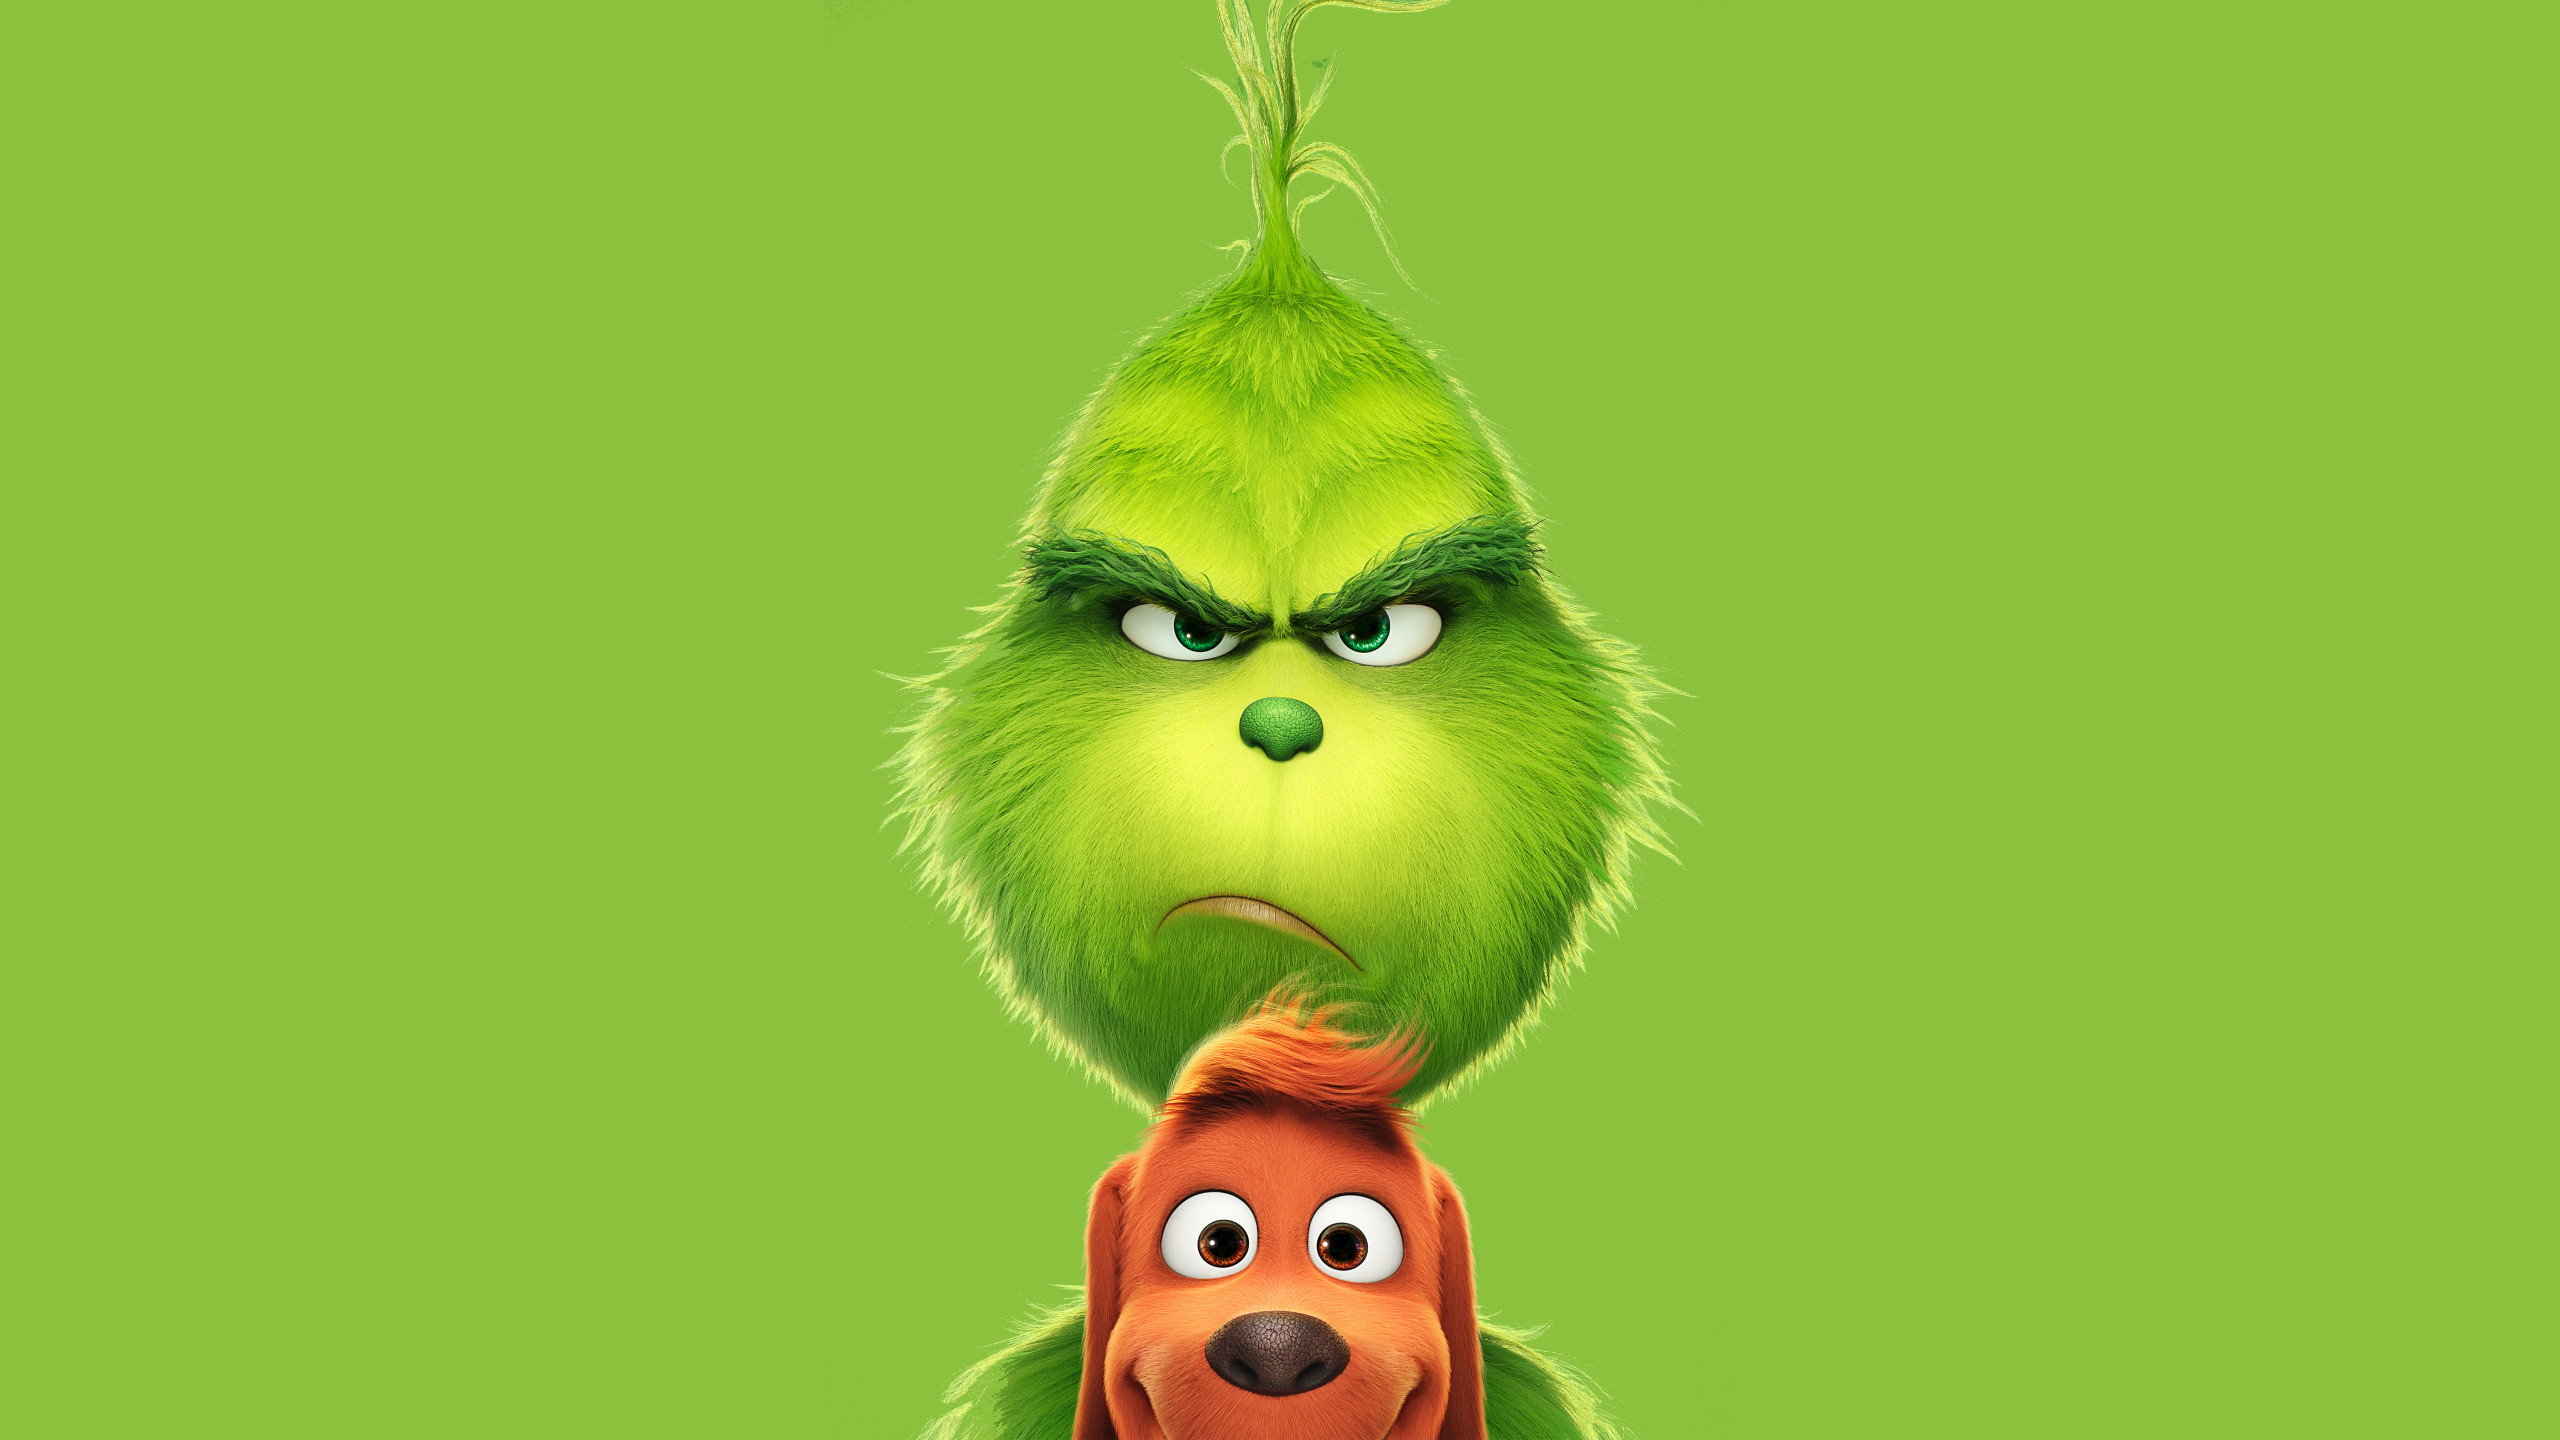 Wallpaper How the Grinch Stole Christmas, 5k, Movies #17758